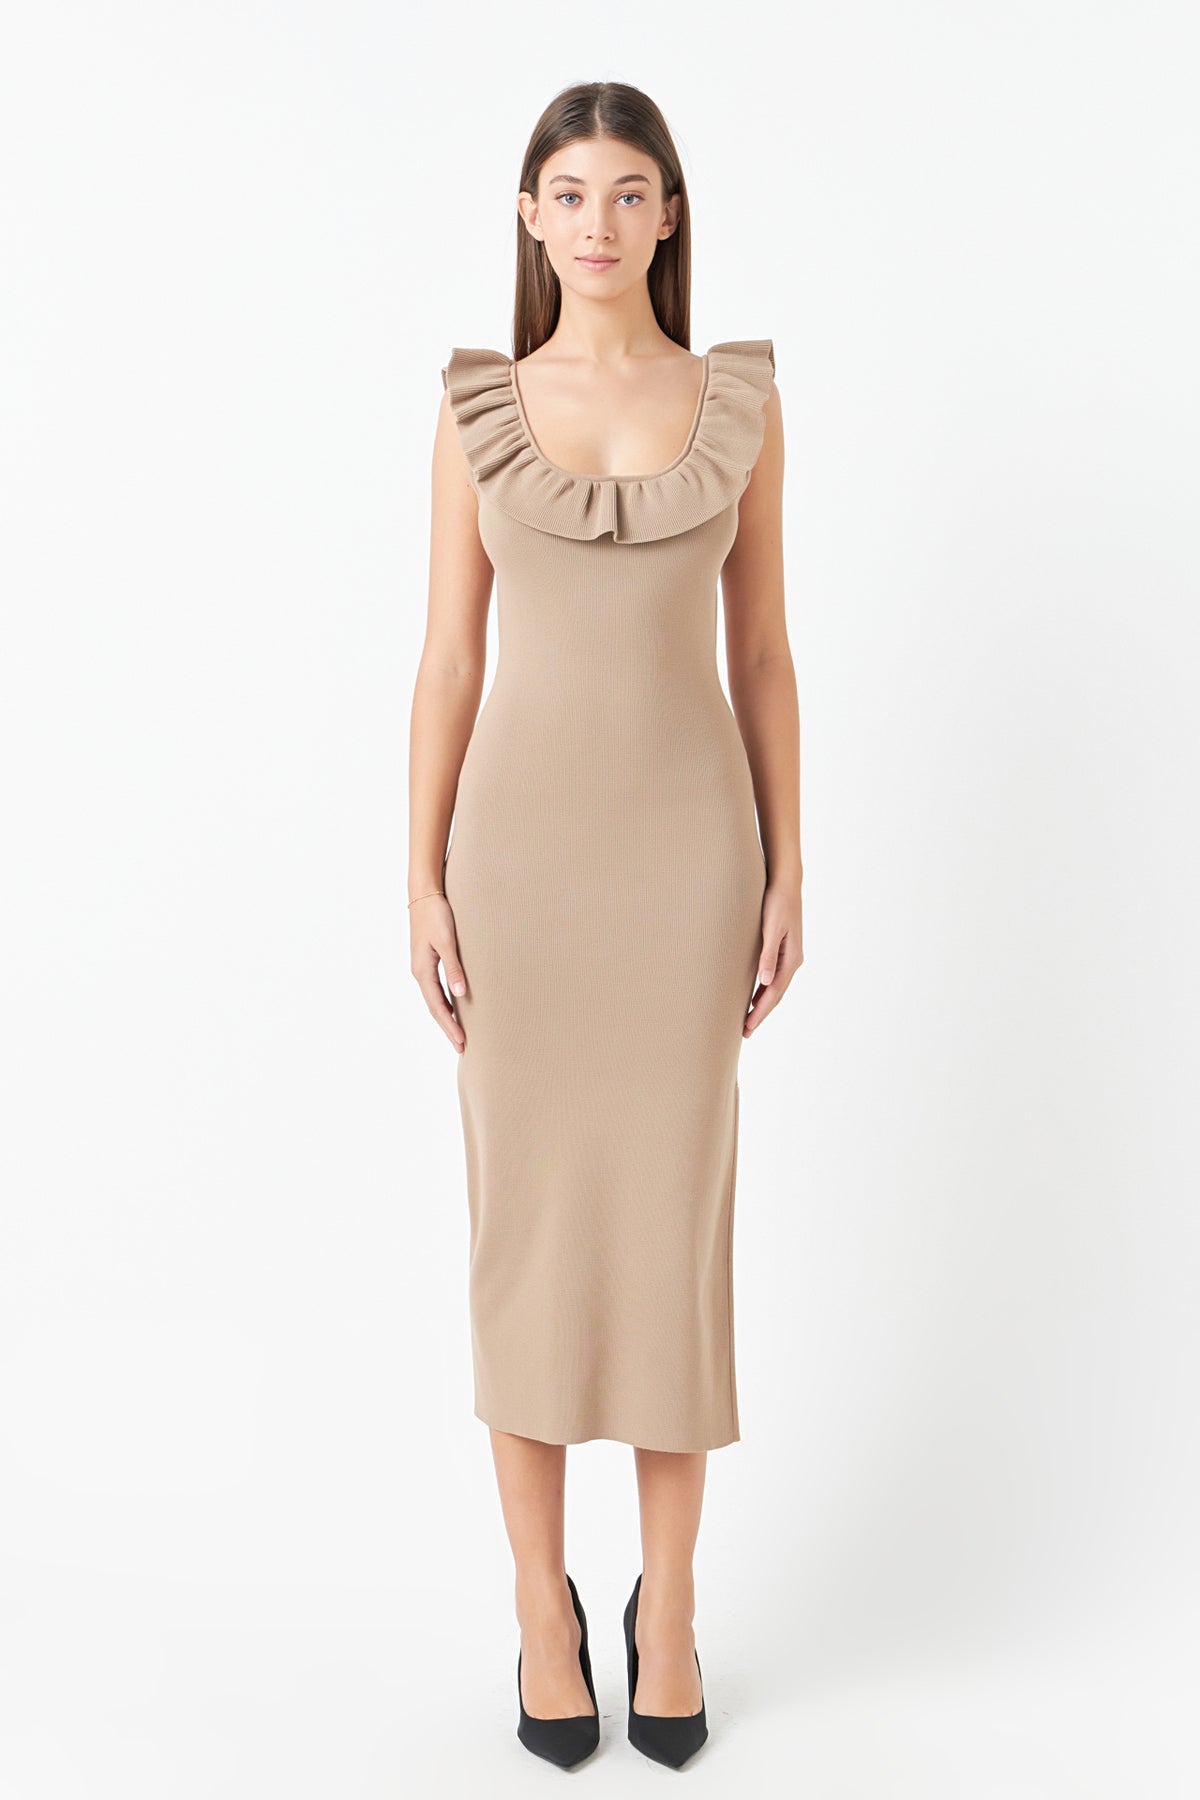 ENDLESS ROSE - Ruffle Neckline Midi Slit Dress - DRESSES available at Objectrare